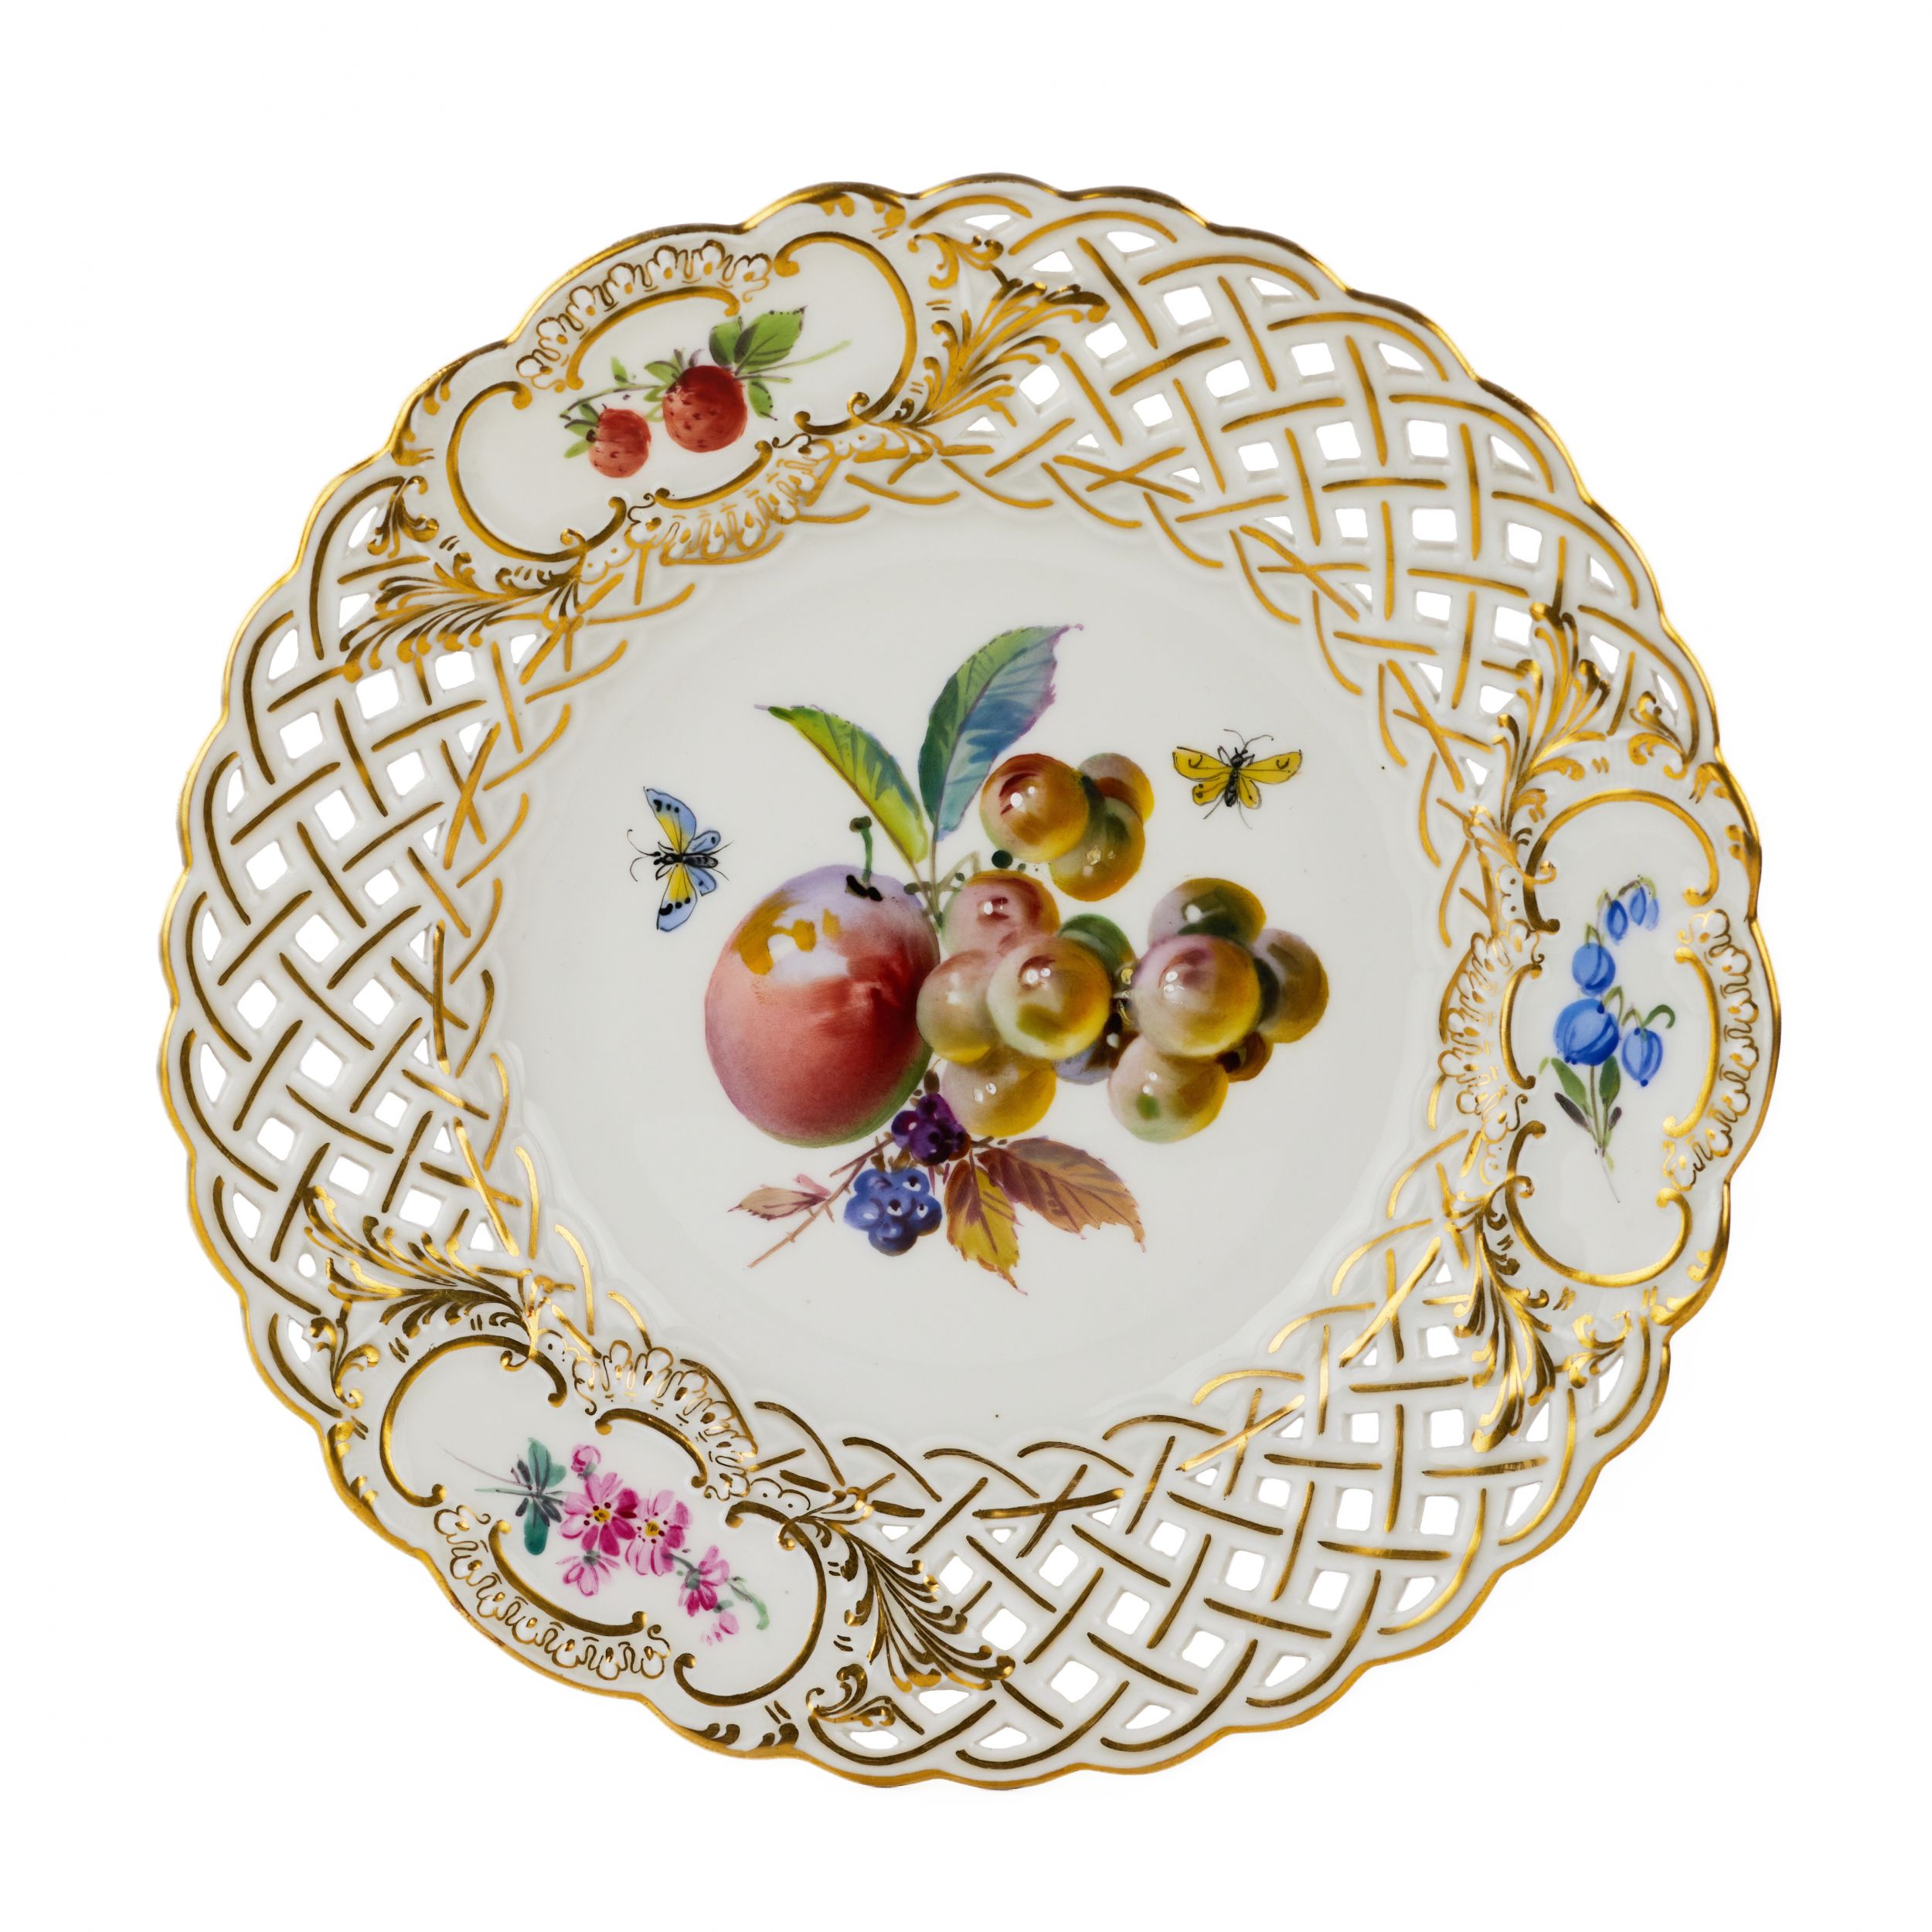 Dessert-porcelain-plate-decorated-with-images-of-berries-and-fruits-Meissen-After-1934-